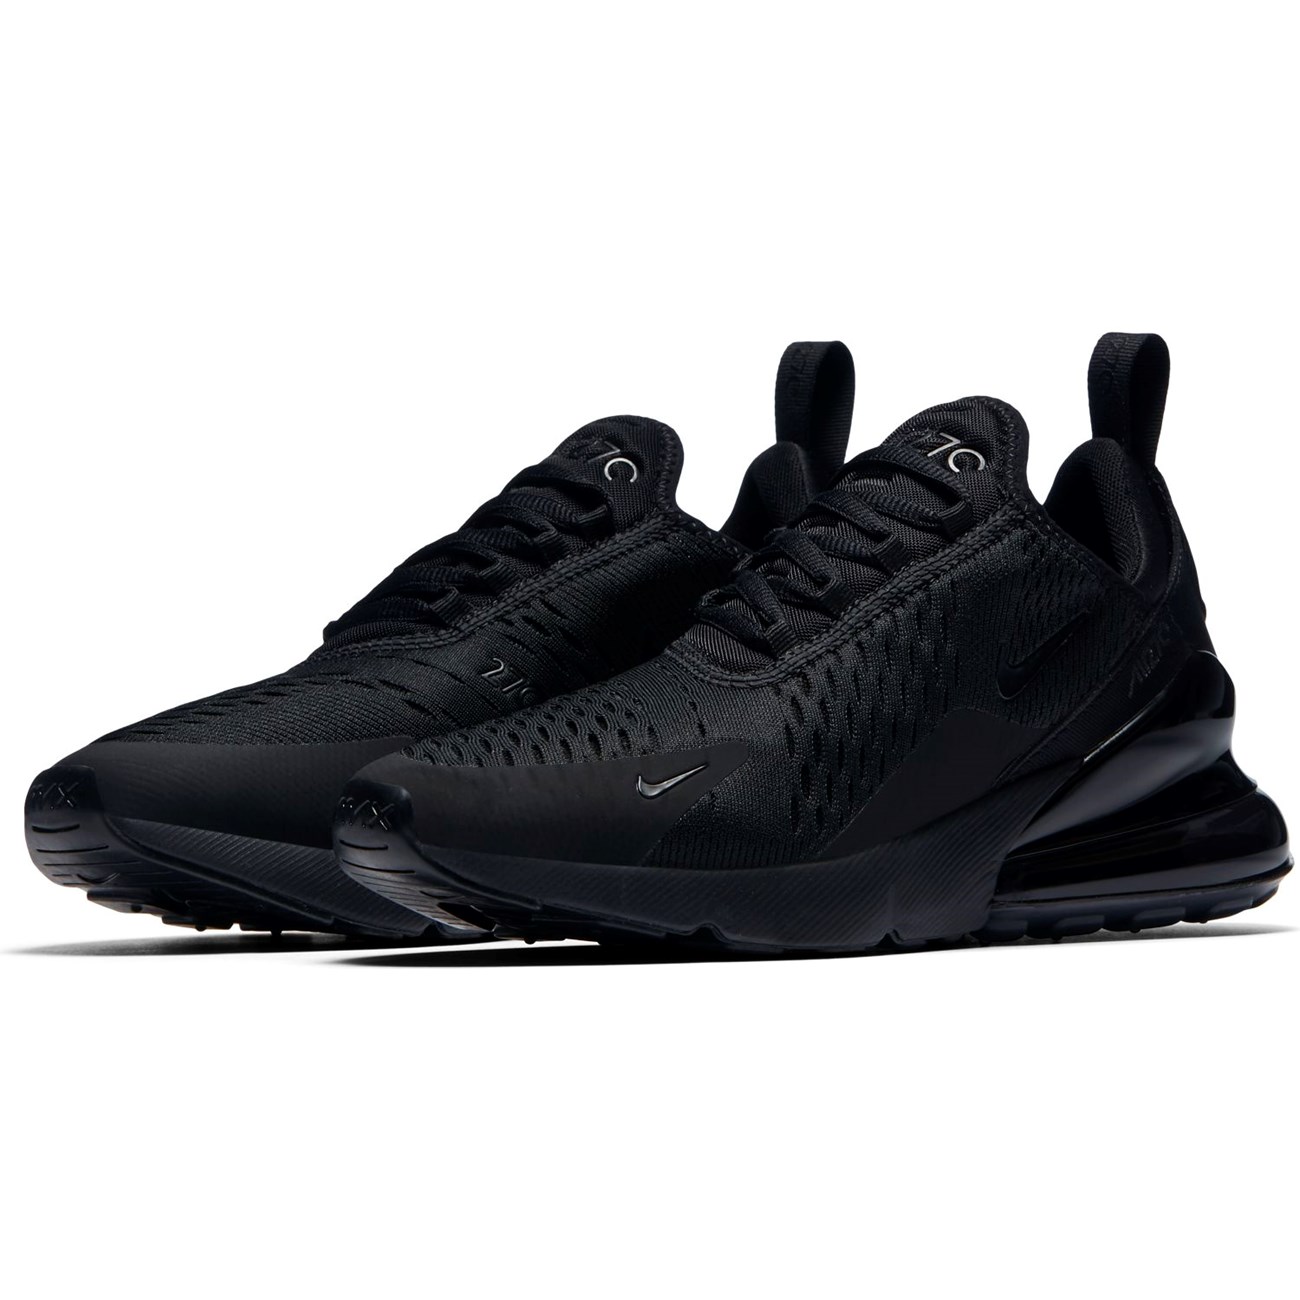 NIKE Γυναικεία Sneakers Air Max 270 AH6789-006 - The Athlete's Foot